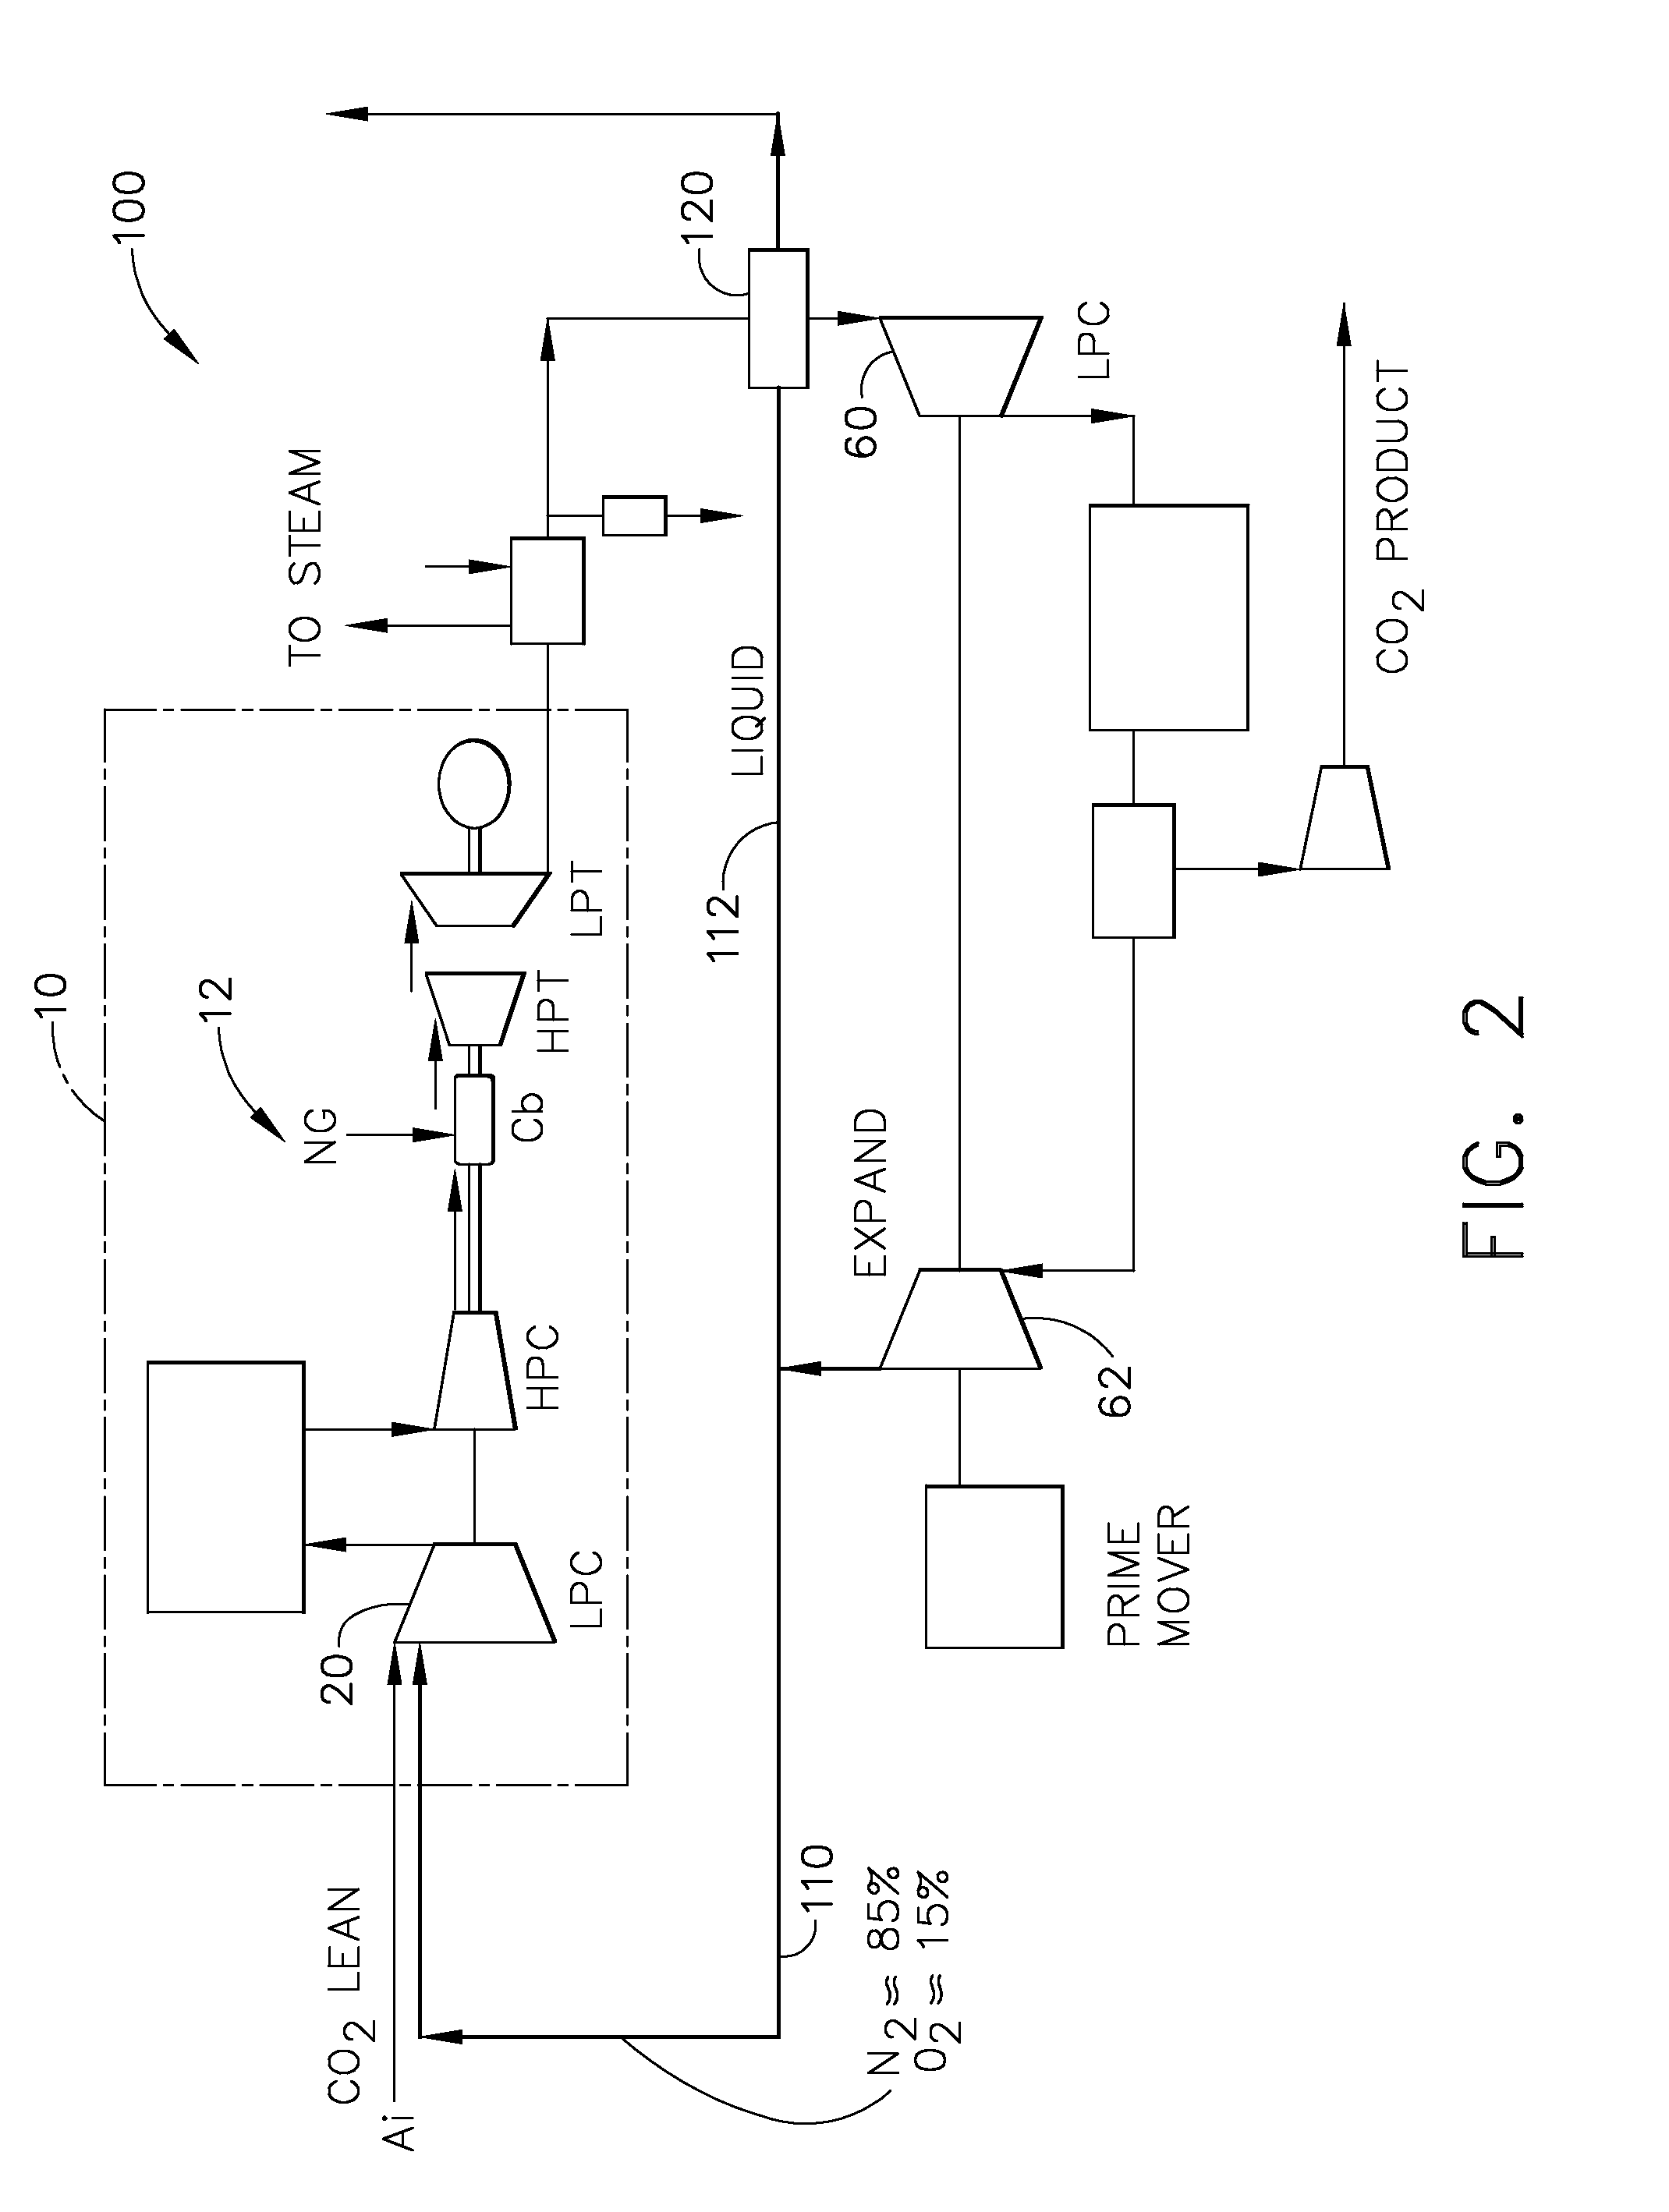 Method and system for reducing power plant emissions